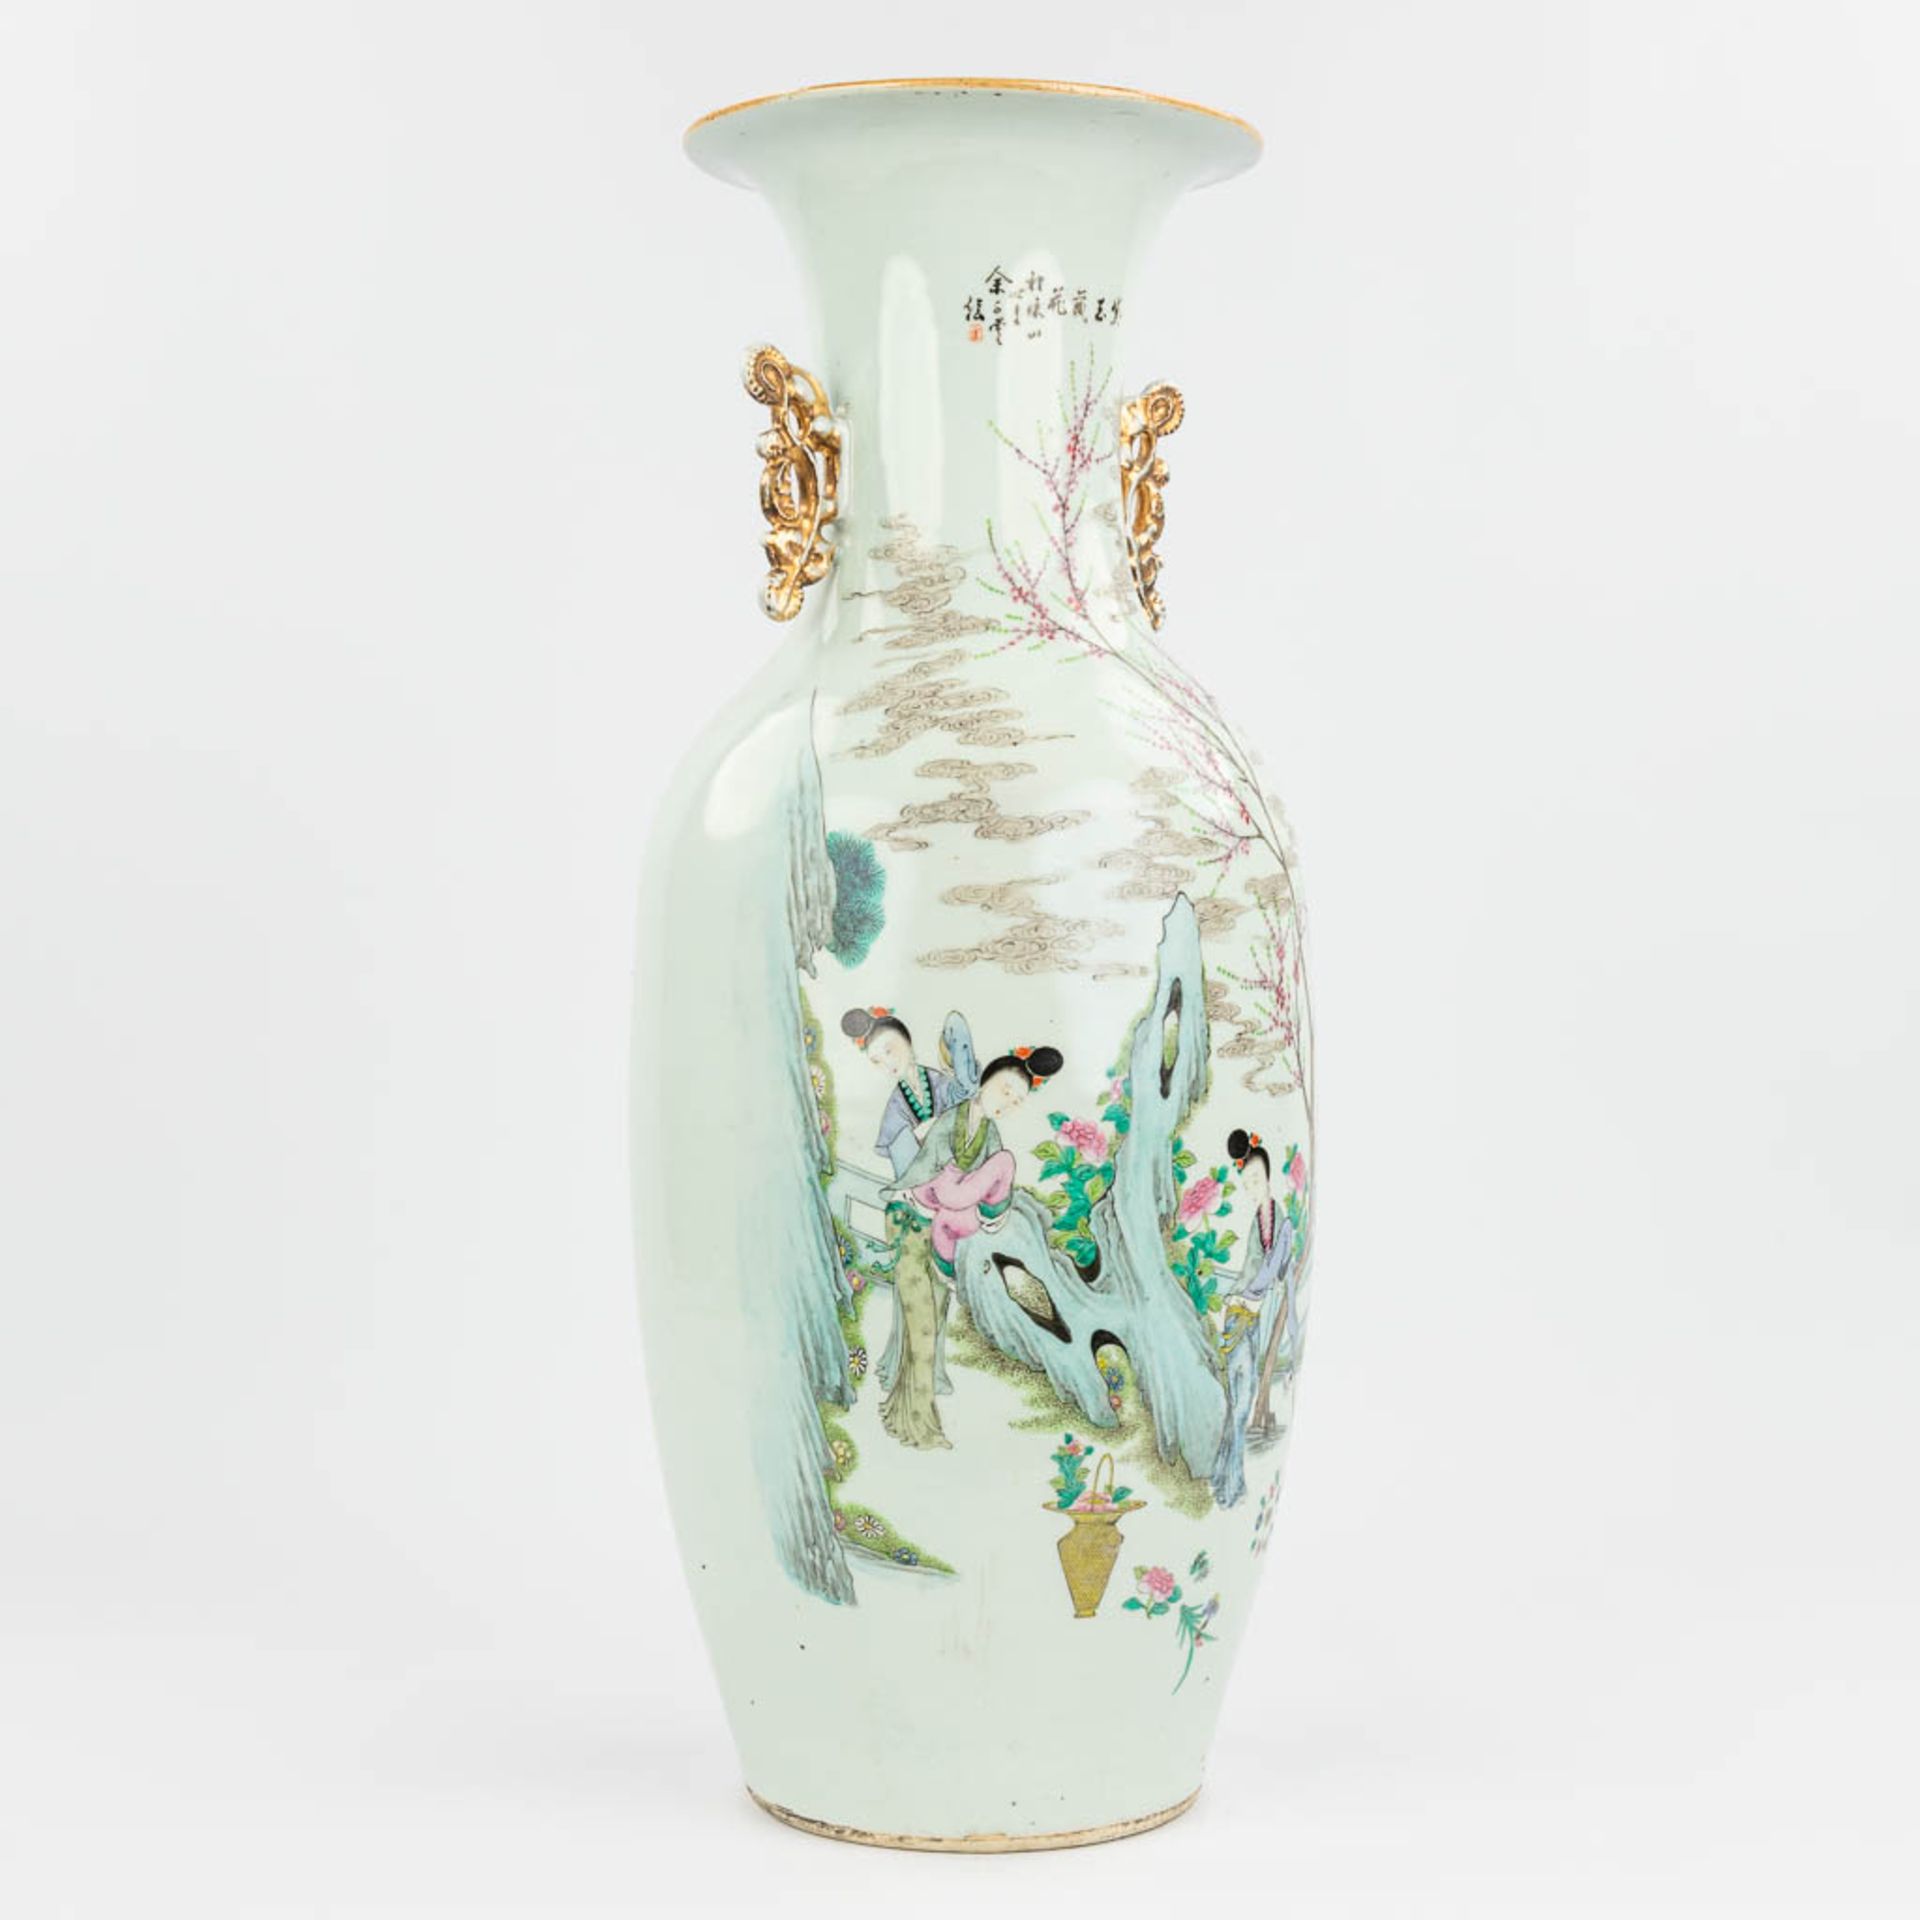 A Chinese vase made of porcelain andÊdecor of ladies near a large rock. (57,5 x 23 cm) - Image 9 of 13